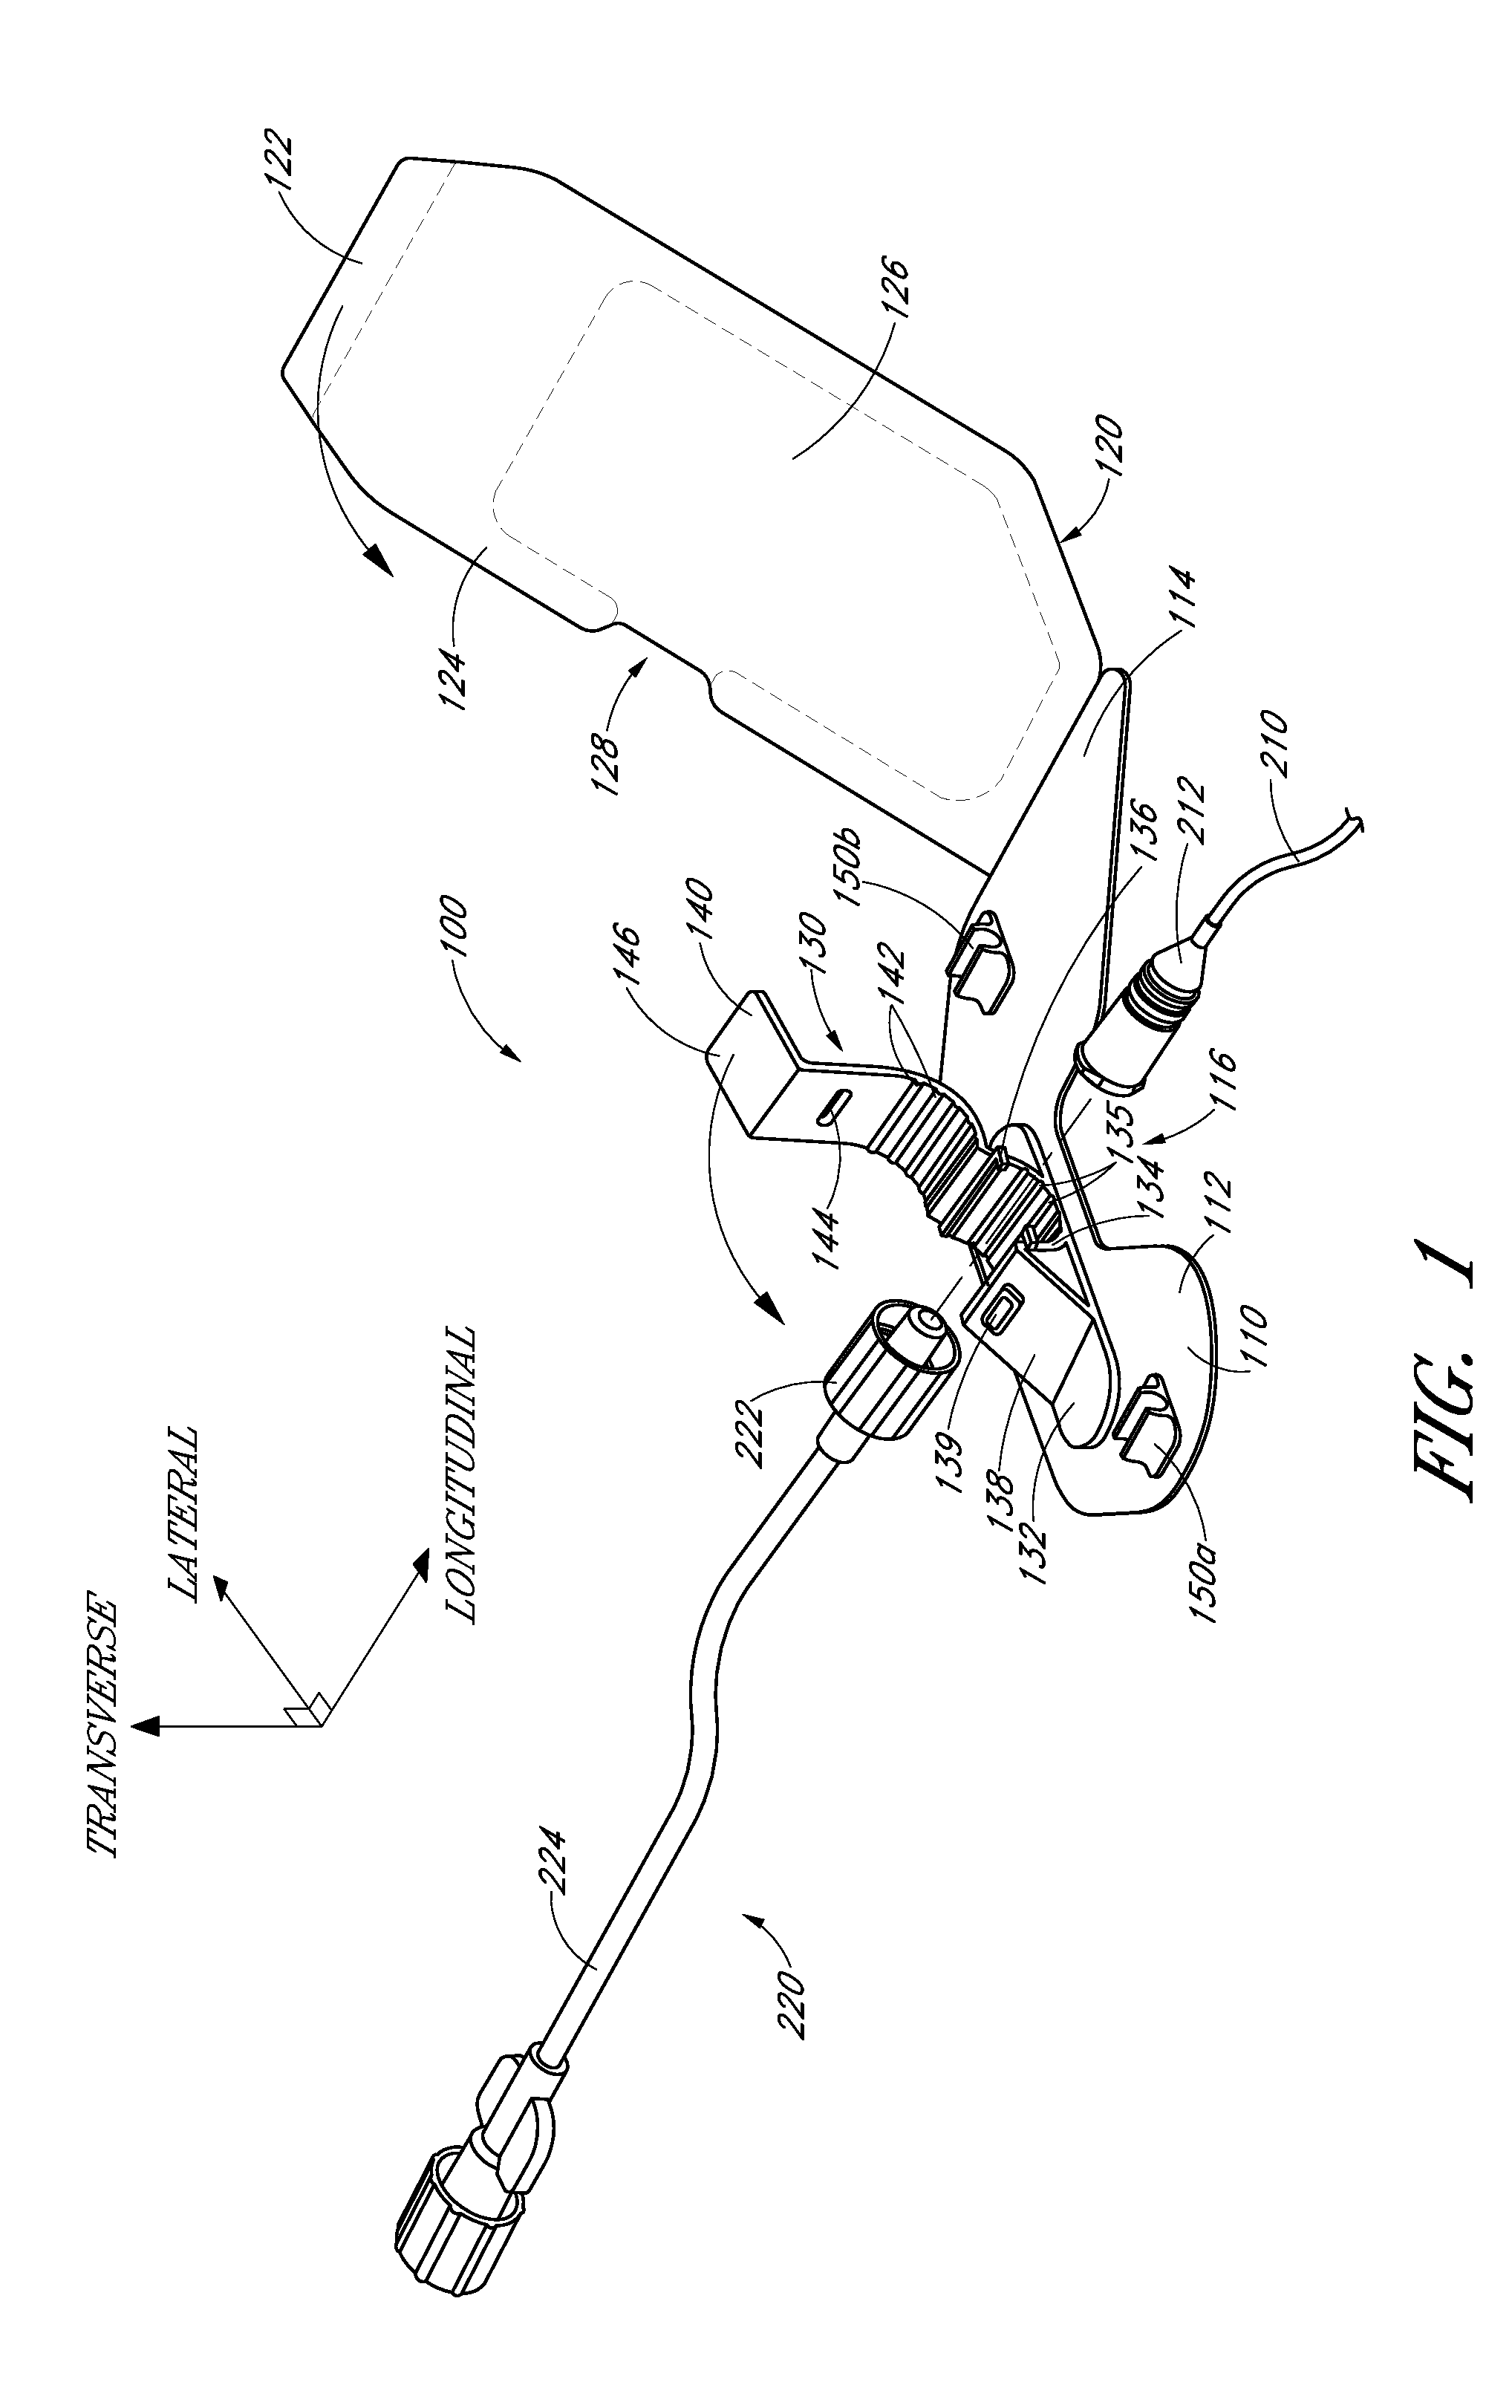 Stabilizing device for an extension set